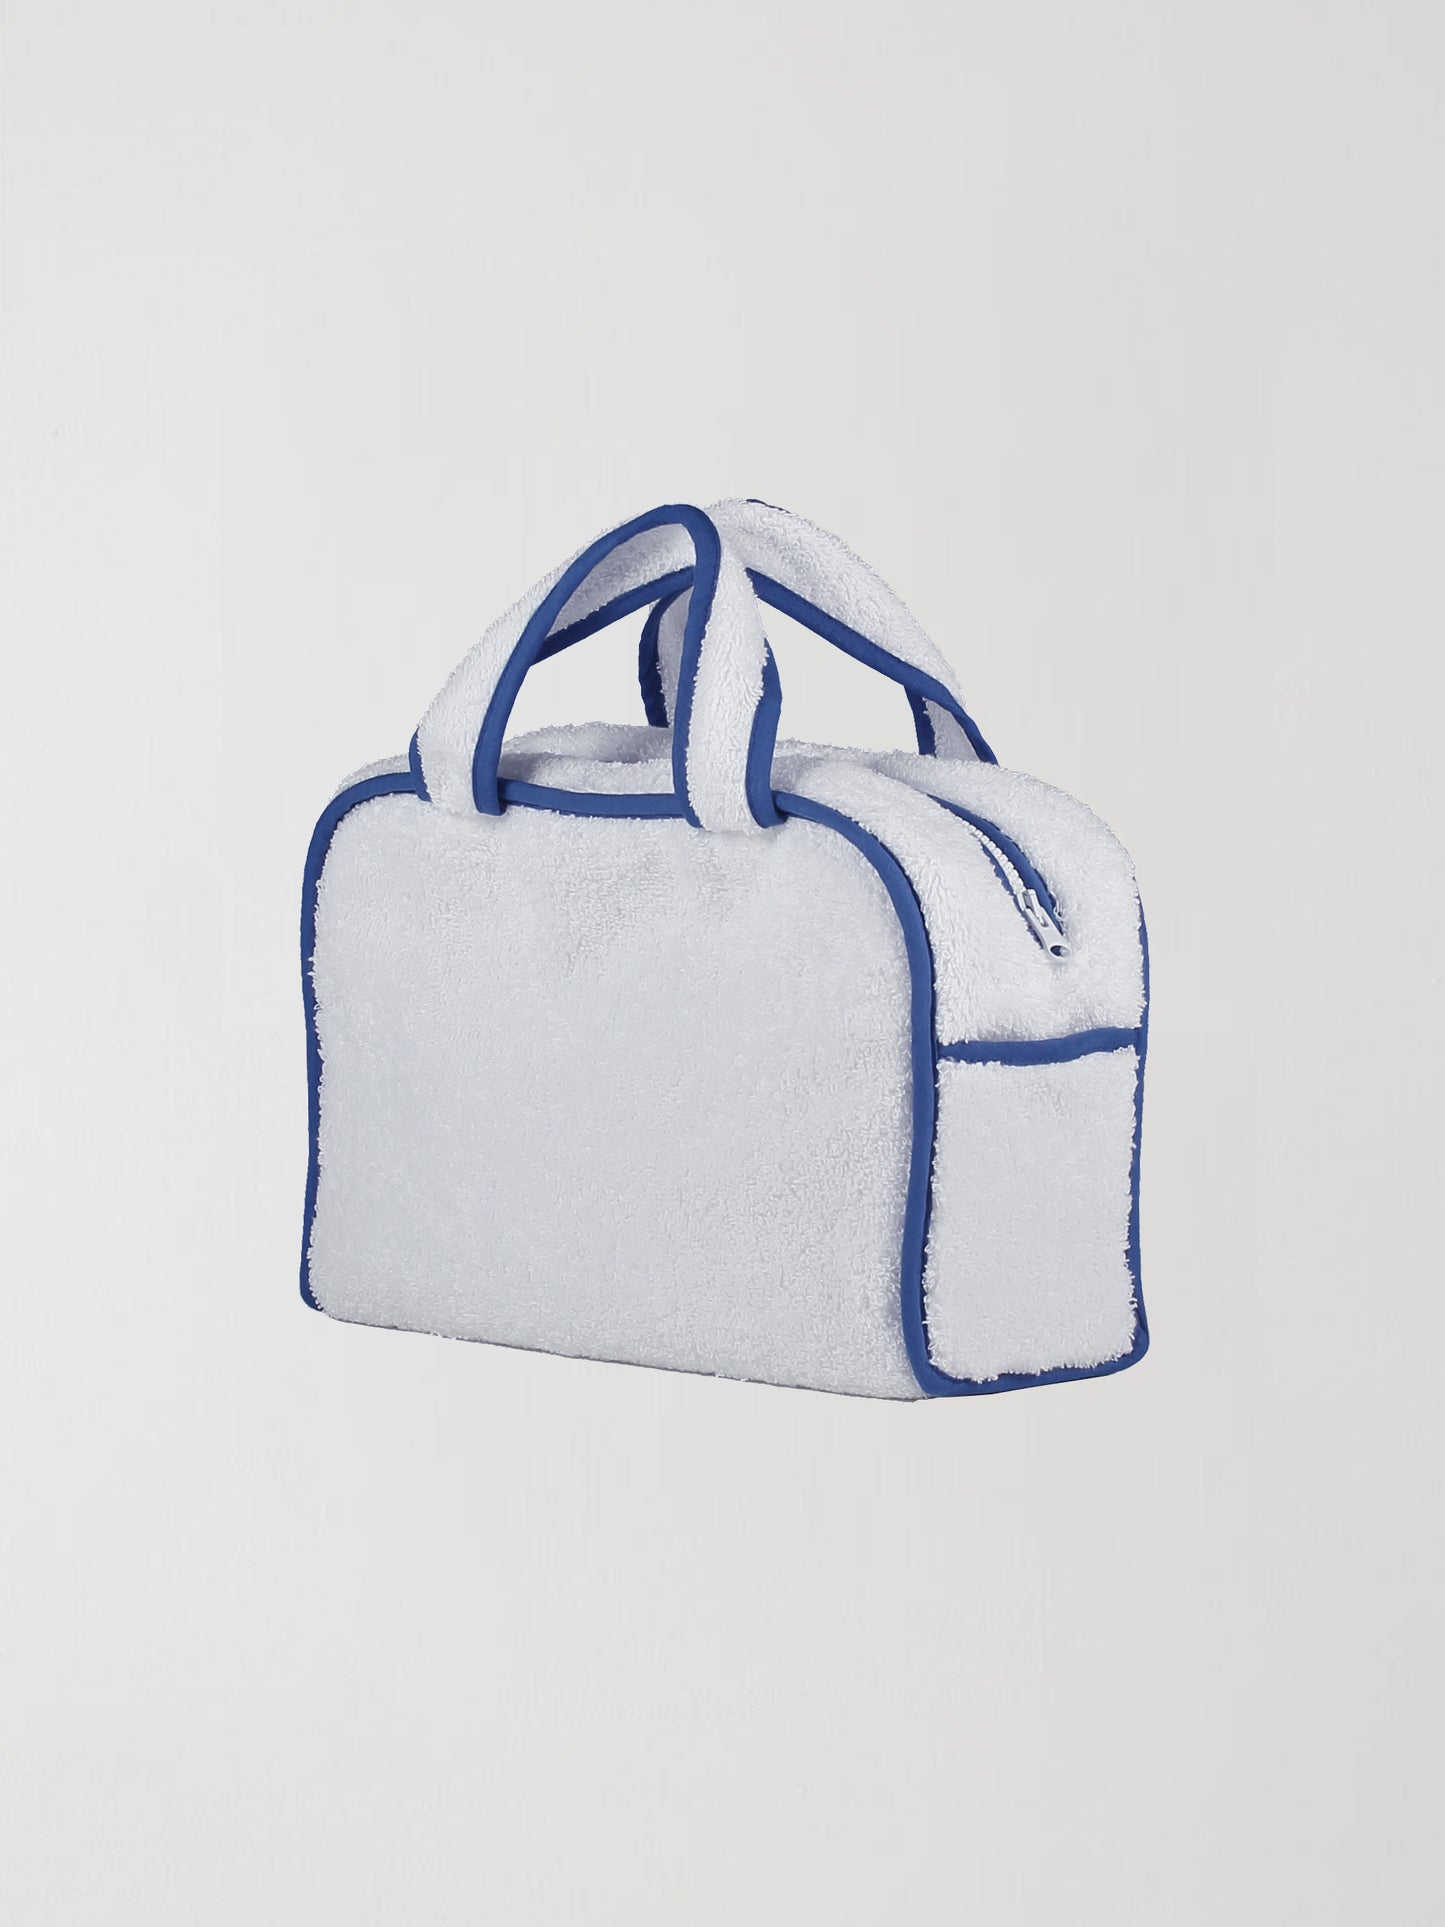 Back of our white towel bag with blue accents